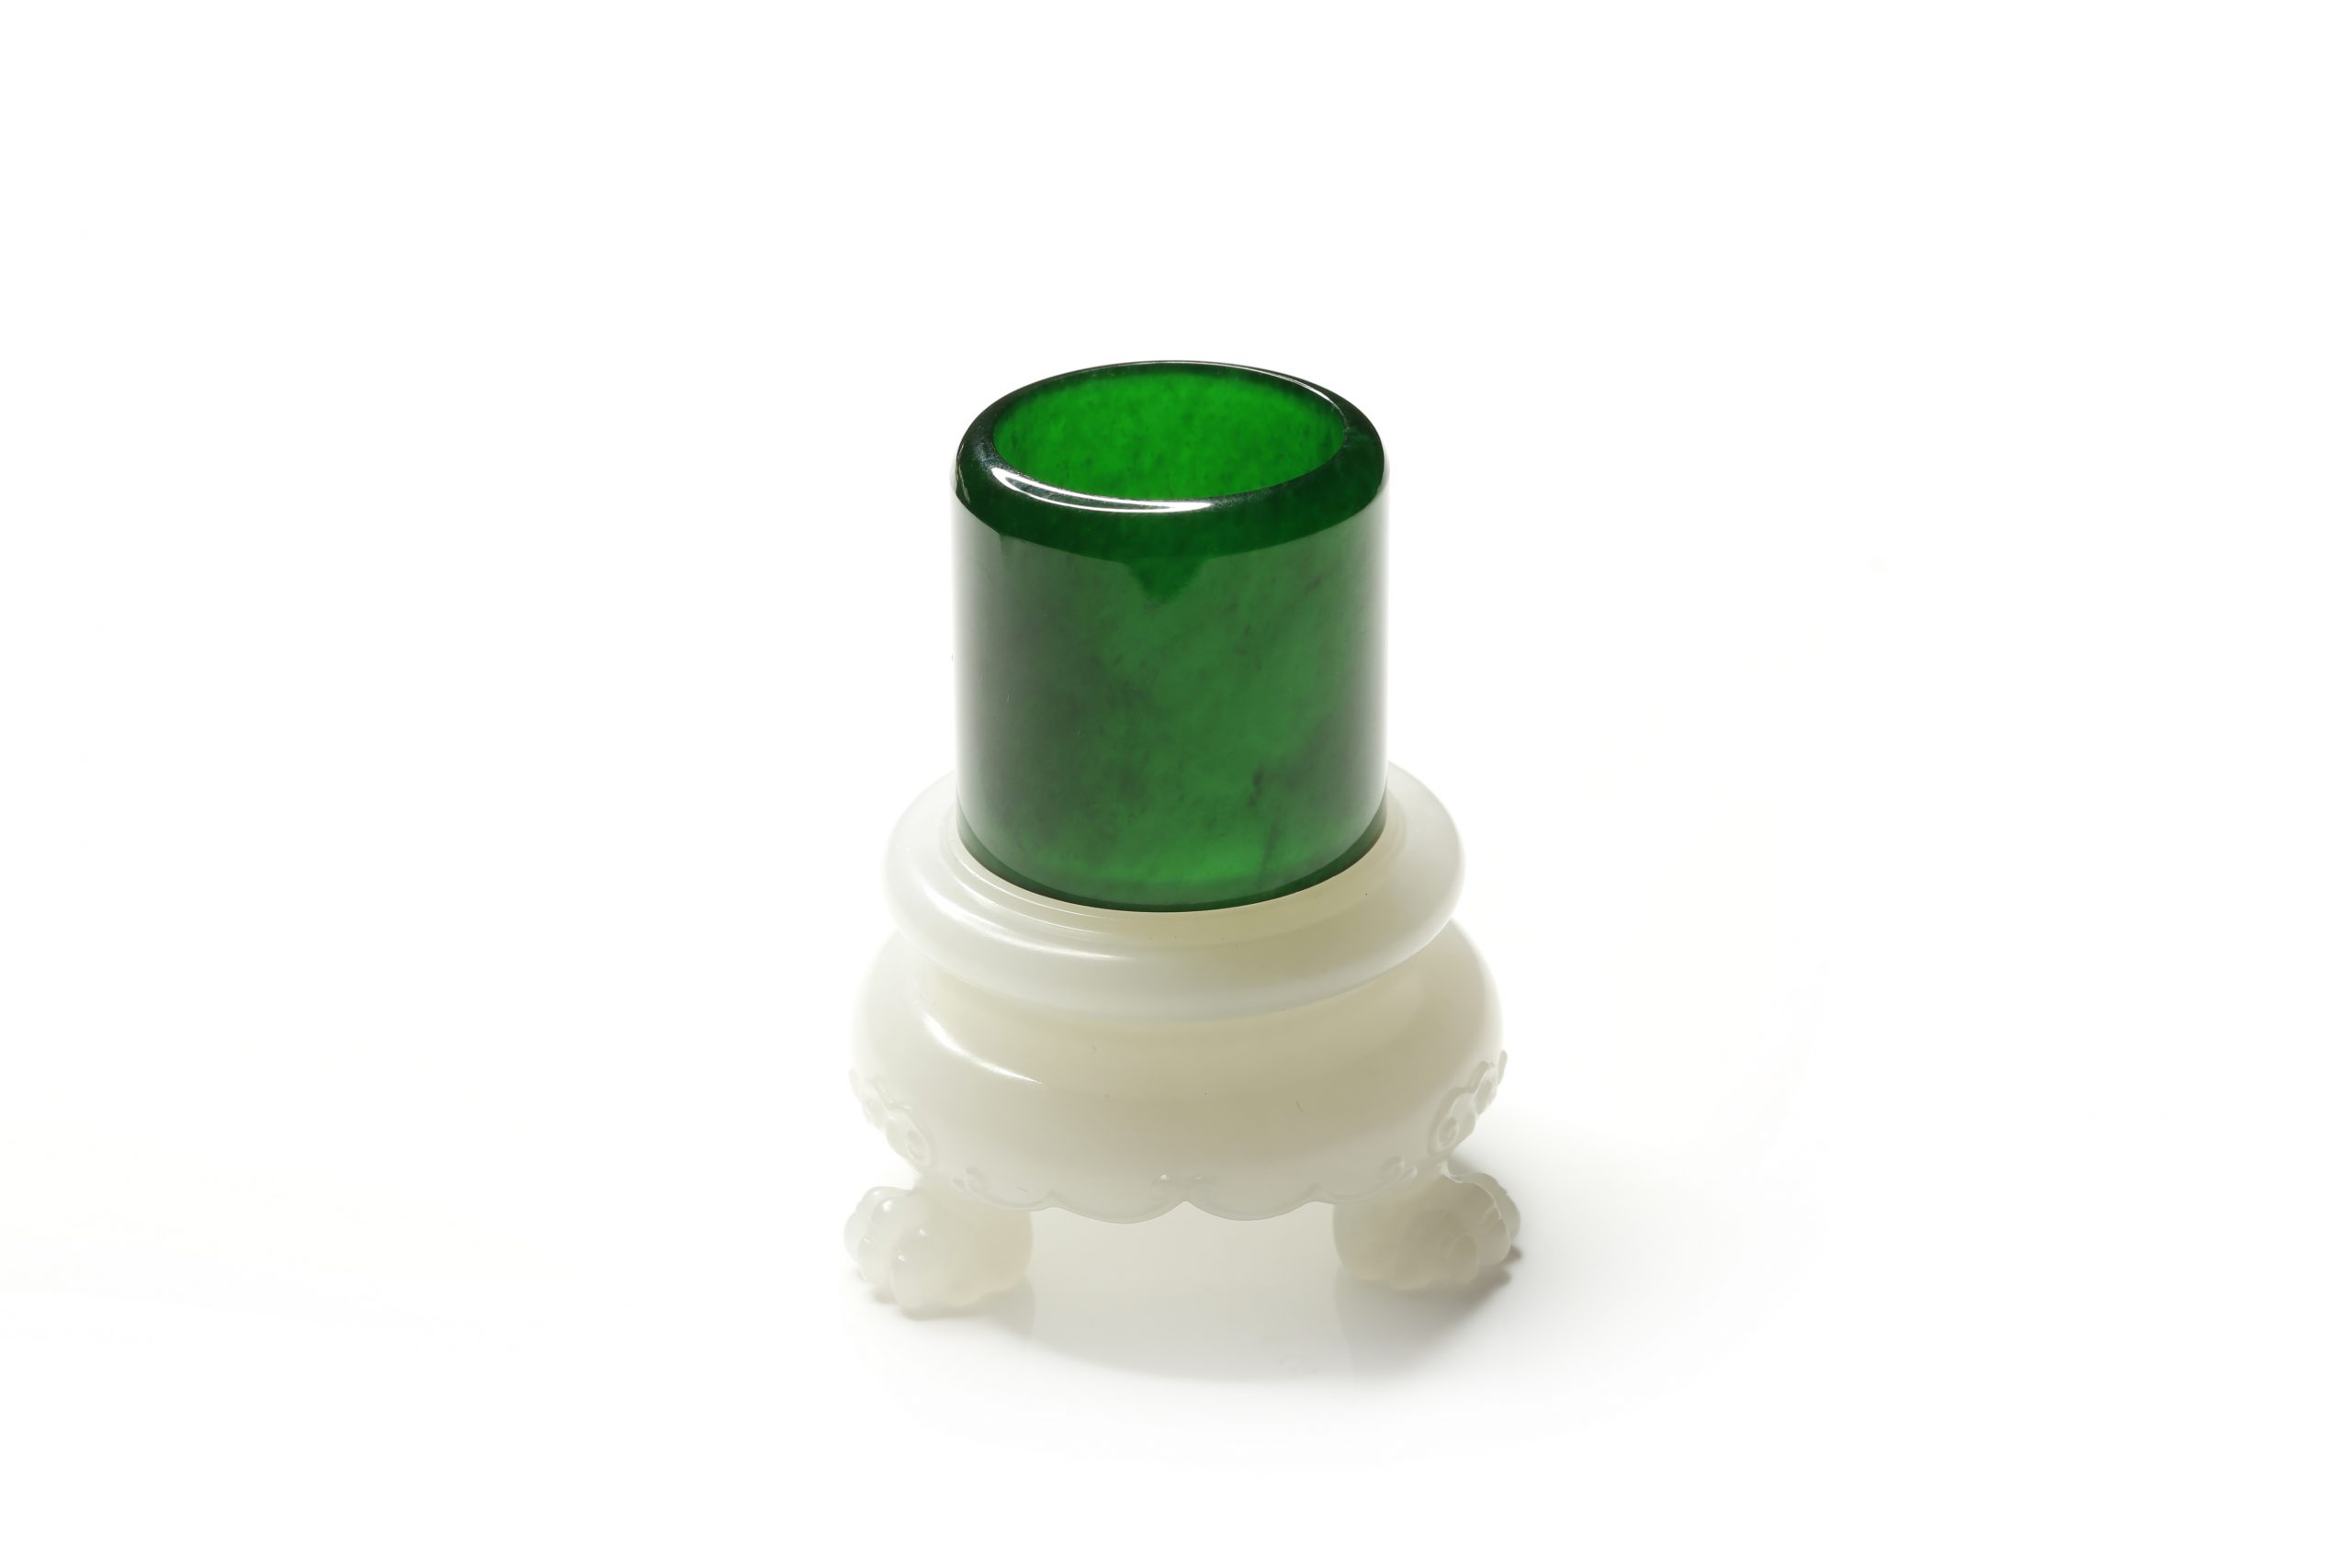 Thumb Ring, 1800s-1900s. China, 19th-20th century. White and green jade;  diameter: 3.1 cm (1 1/4 in.); overall: 2.6 cm (1 in.). - Album alb4240790